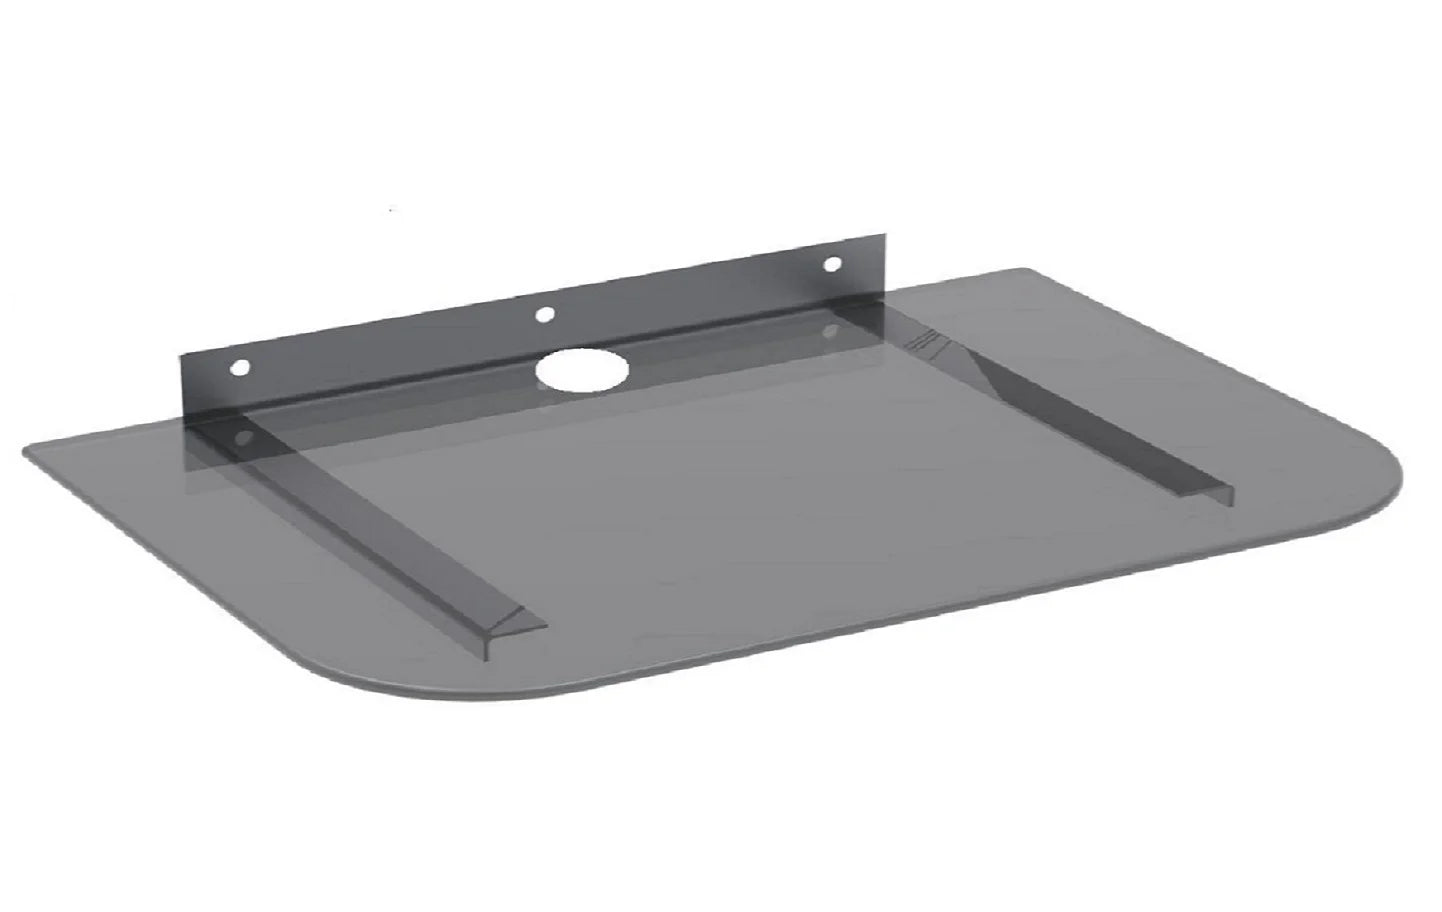 Skill Tech SH 07D - Economy Steel & Tempered Glass Wall Mount